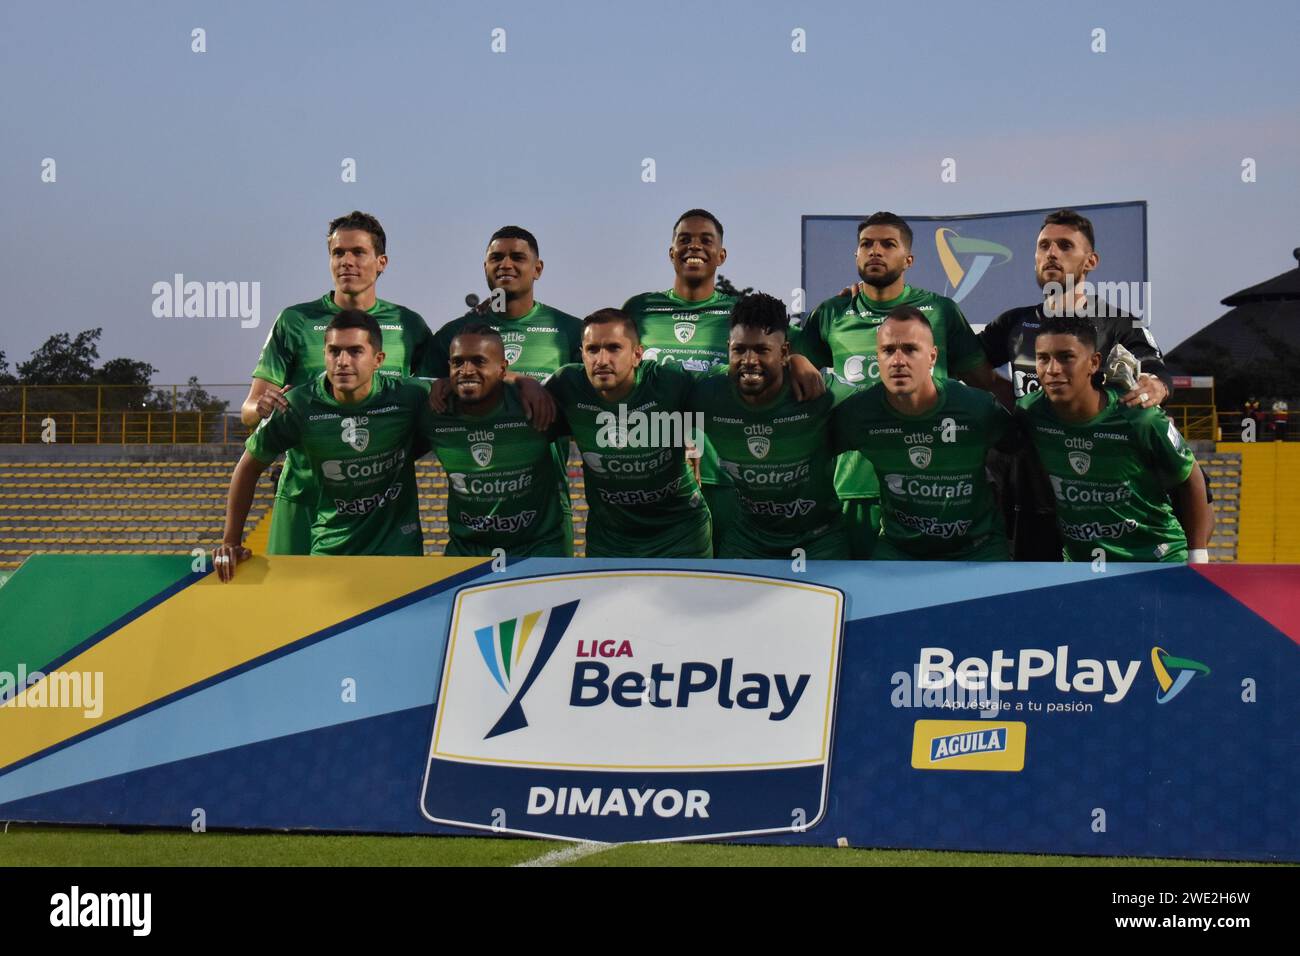 Bogota, Colombia. 22nd Jan, 2024. The Equidad team poses for the official match photo during the Equidad vs Envigado match for the Betplay Dimayor league in the Techo stadium in Bogota, Colombia, January 22, 2024. Photo by: Cristian Bayona/Long Visual Press Credit: Long Visual Press/Alamy Live News Stock Photo